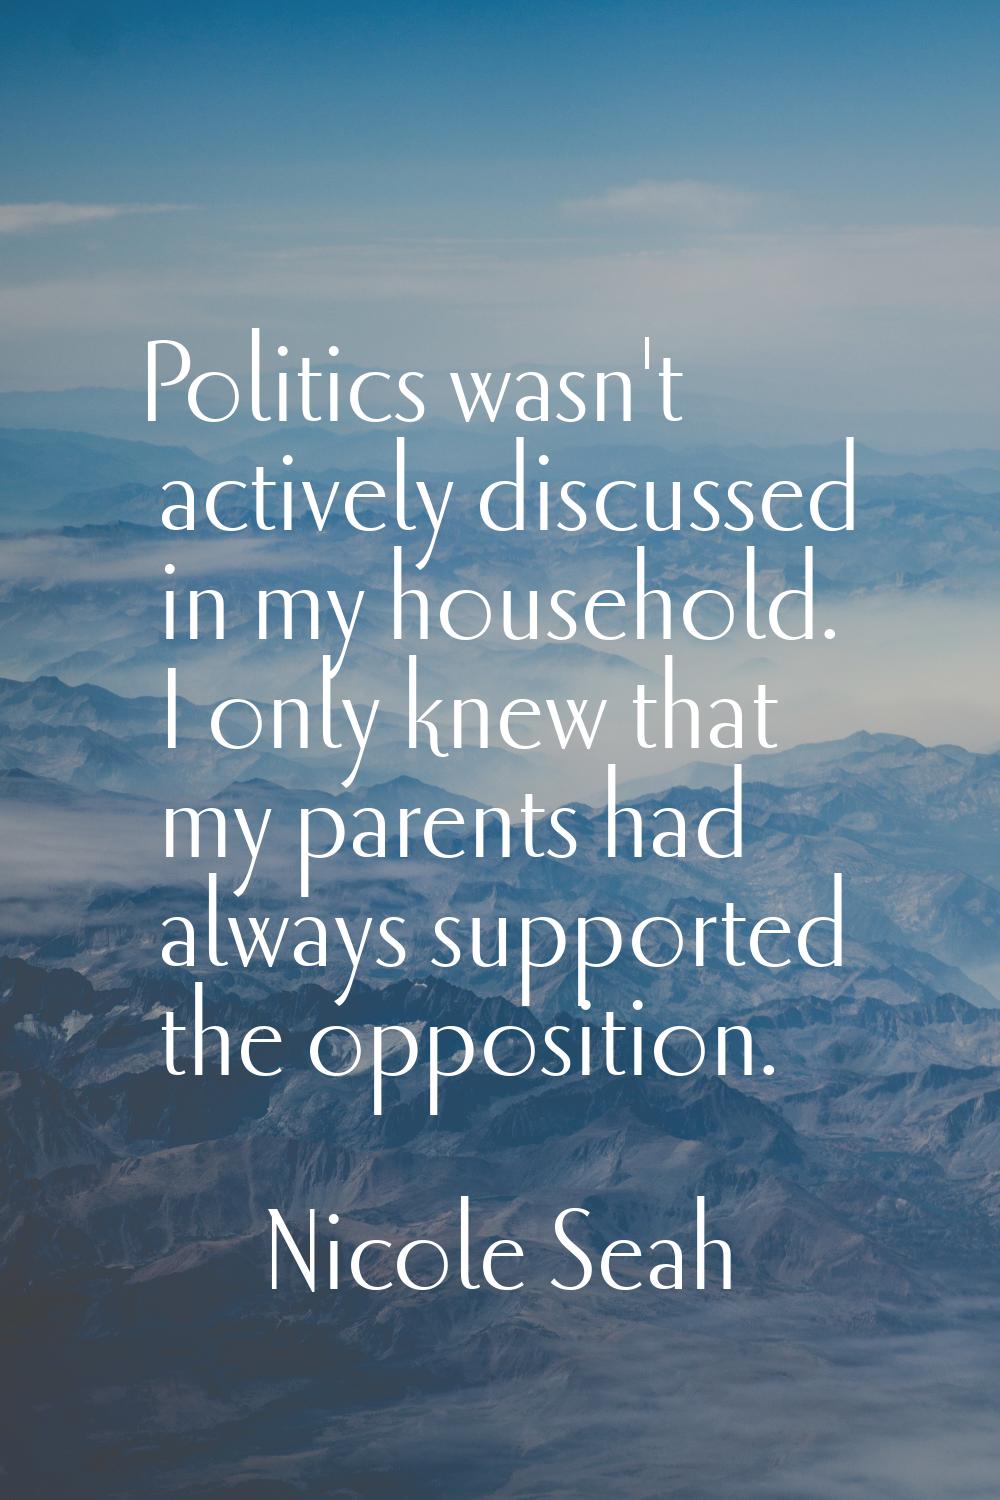 Politics wasn't actively discussed in my household. I only knew that my parents had always supporte